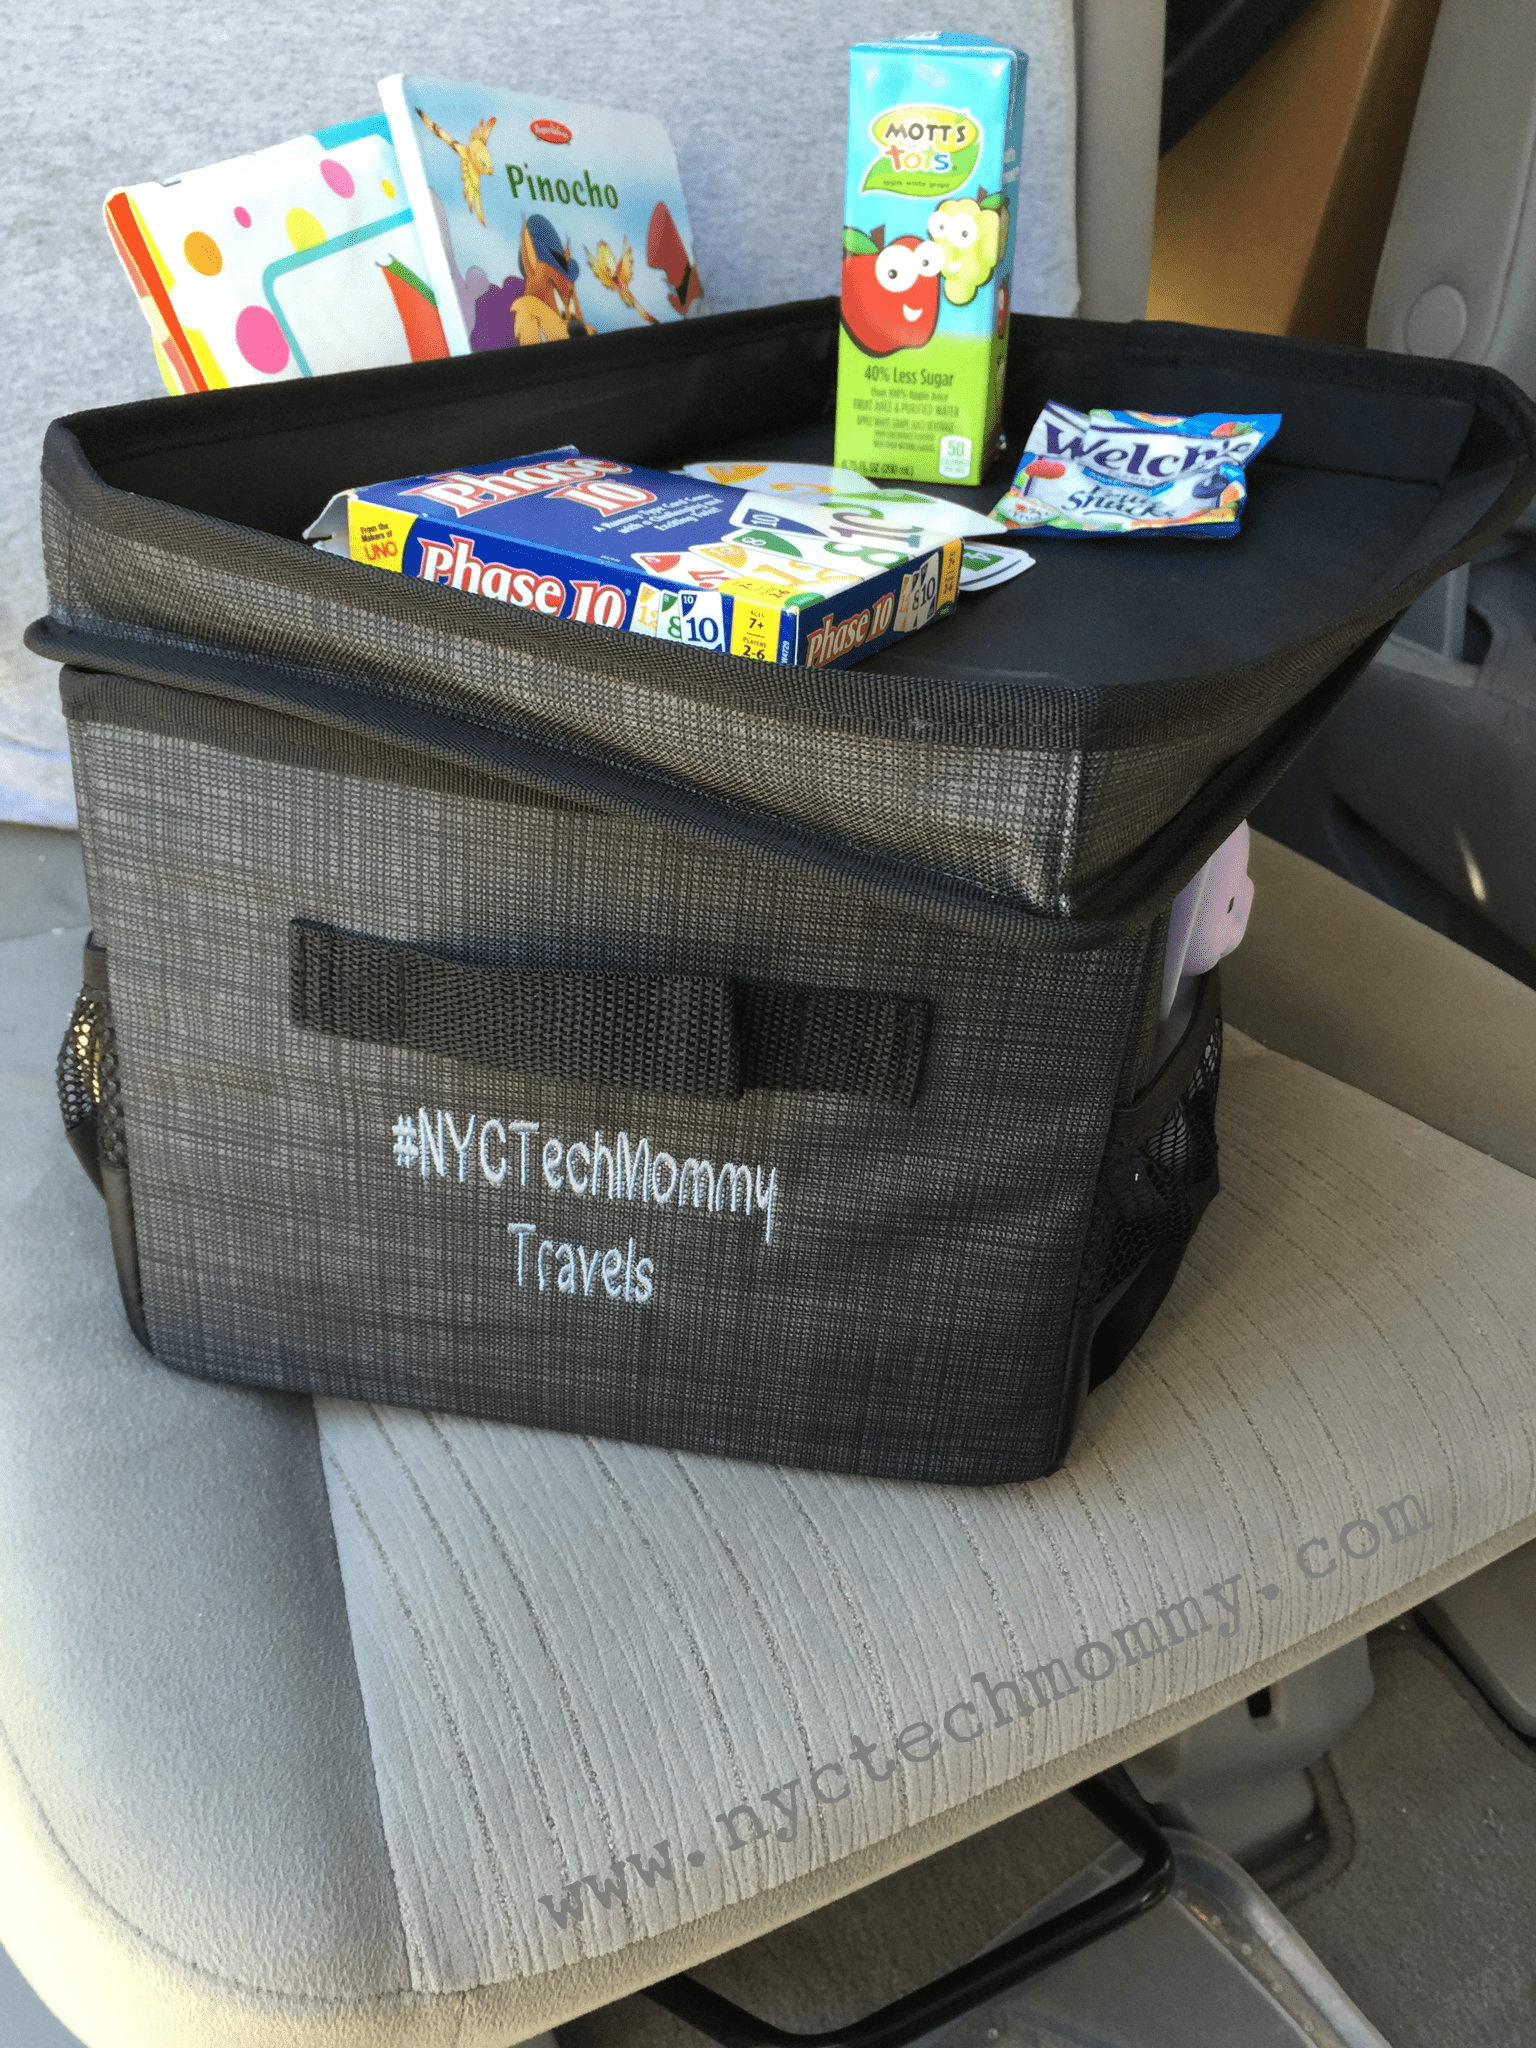 Three Tips to Get Your Car Organized and Your Kids Too